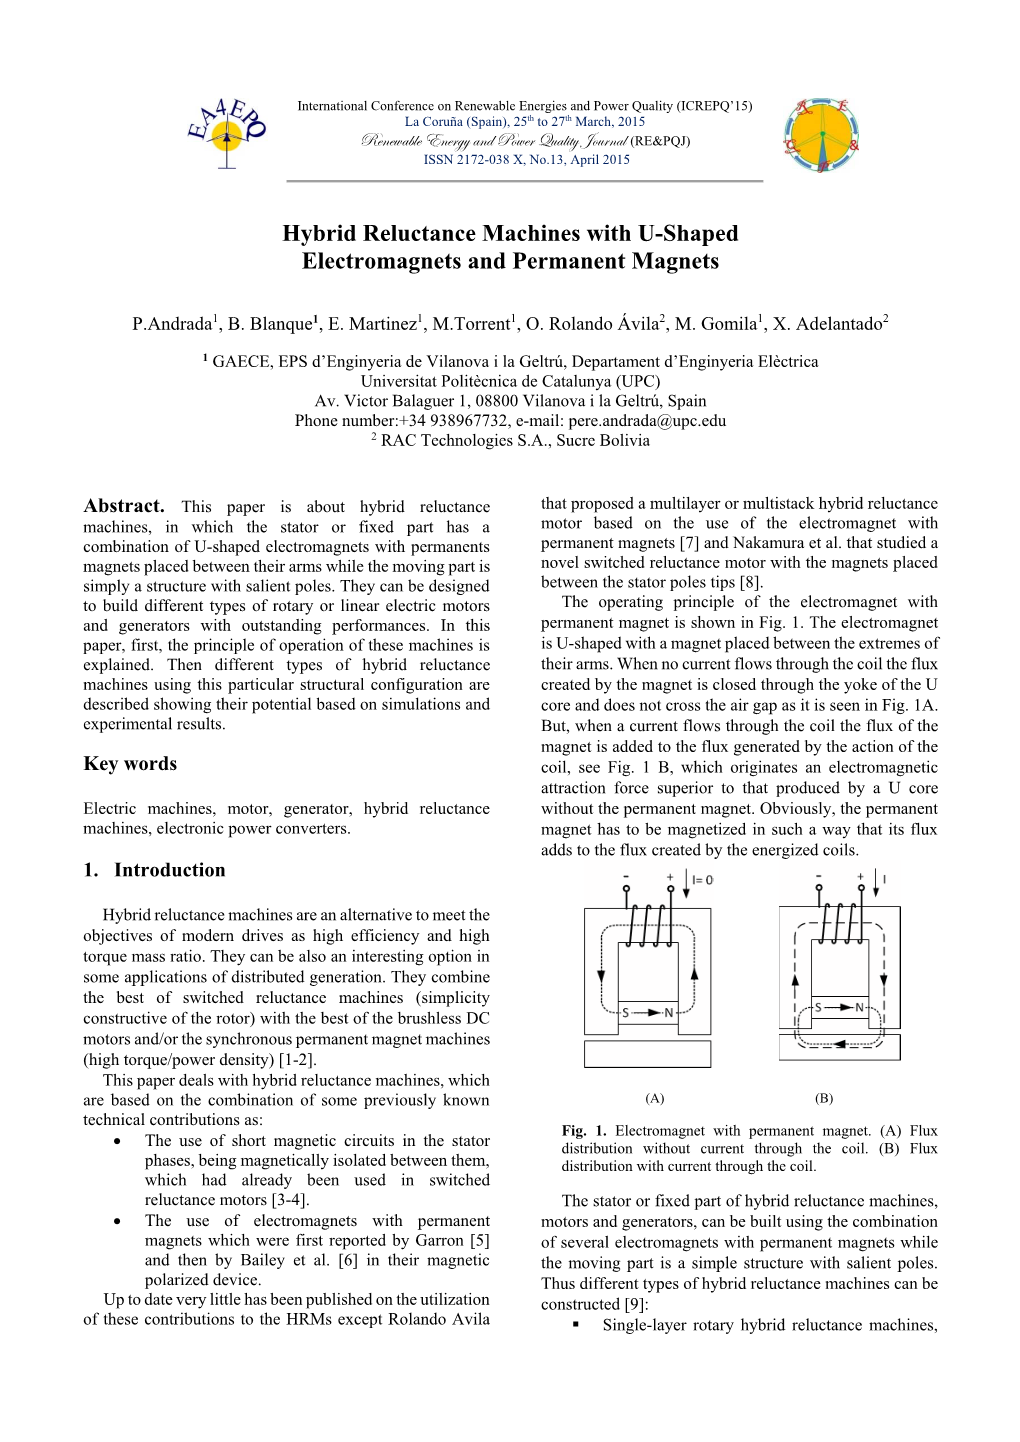 Hybrid Reluctance Machines with U-Shaped Electromagnets and Permanent Magnets